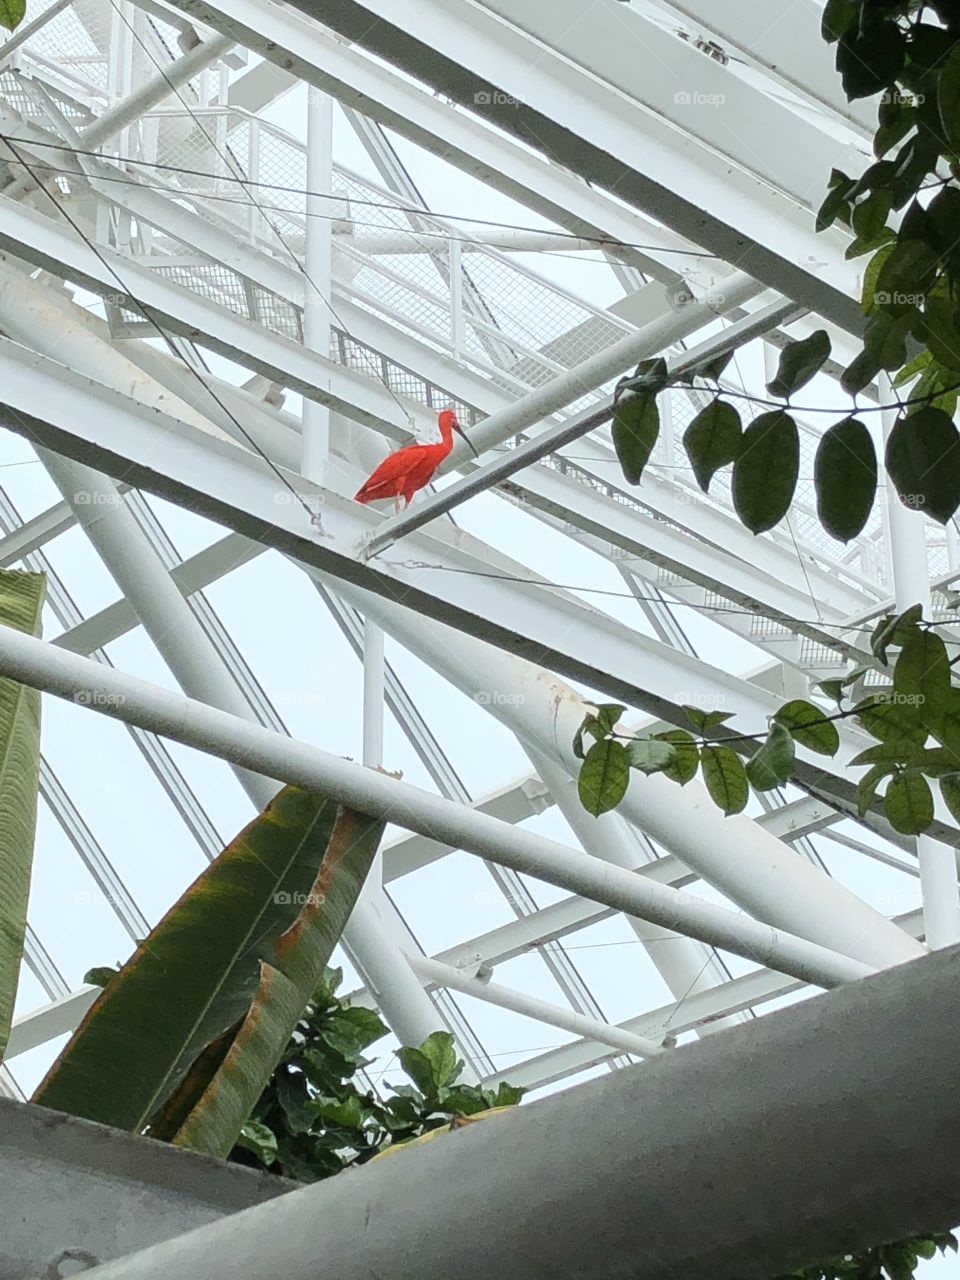 Tropical Scarlet Ibis in the rafters at Moody Gardens Rainforest exhibit, Galveston, Tx